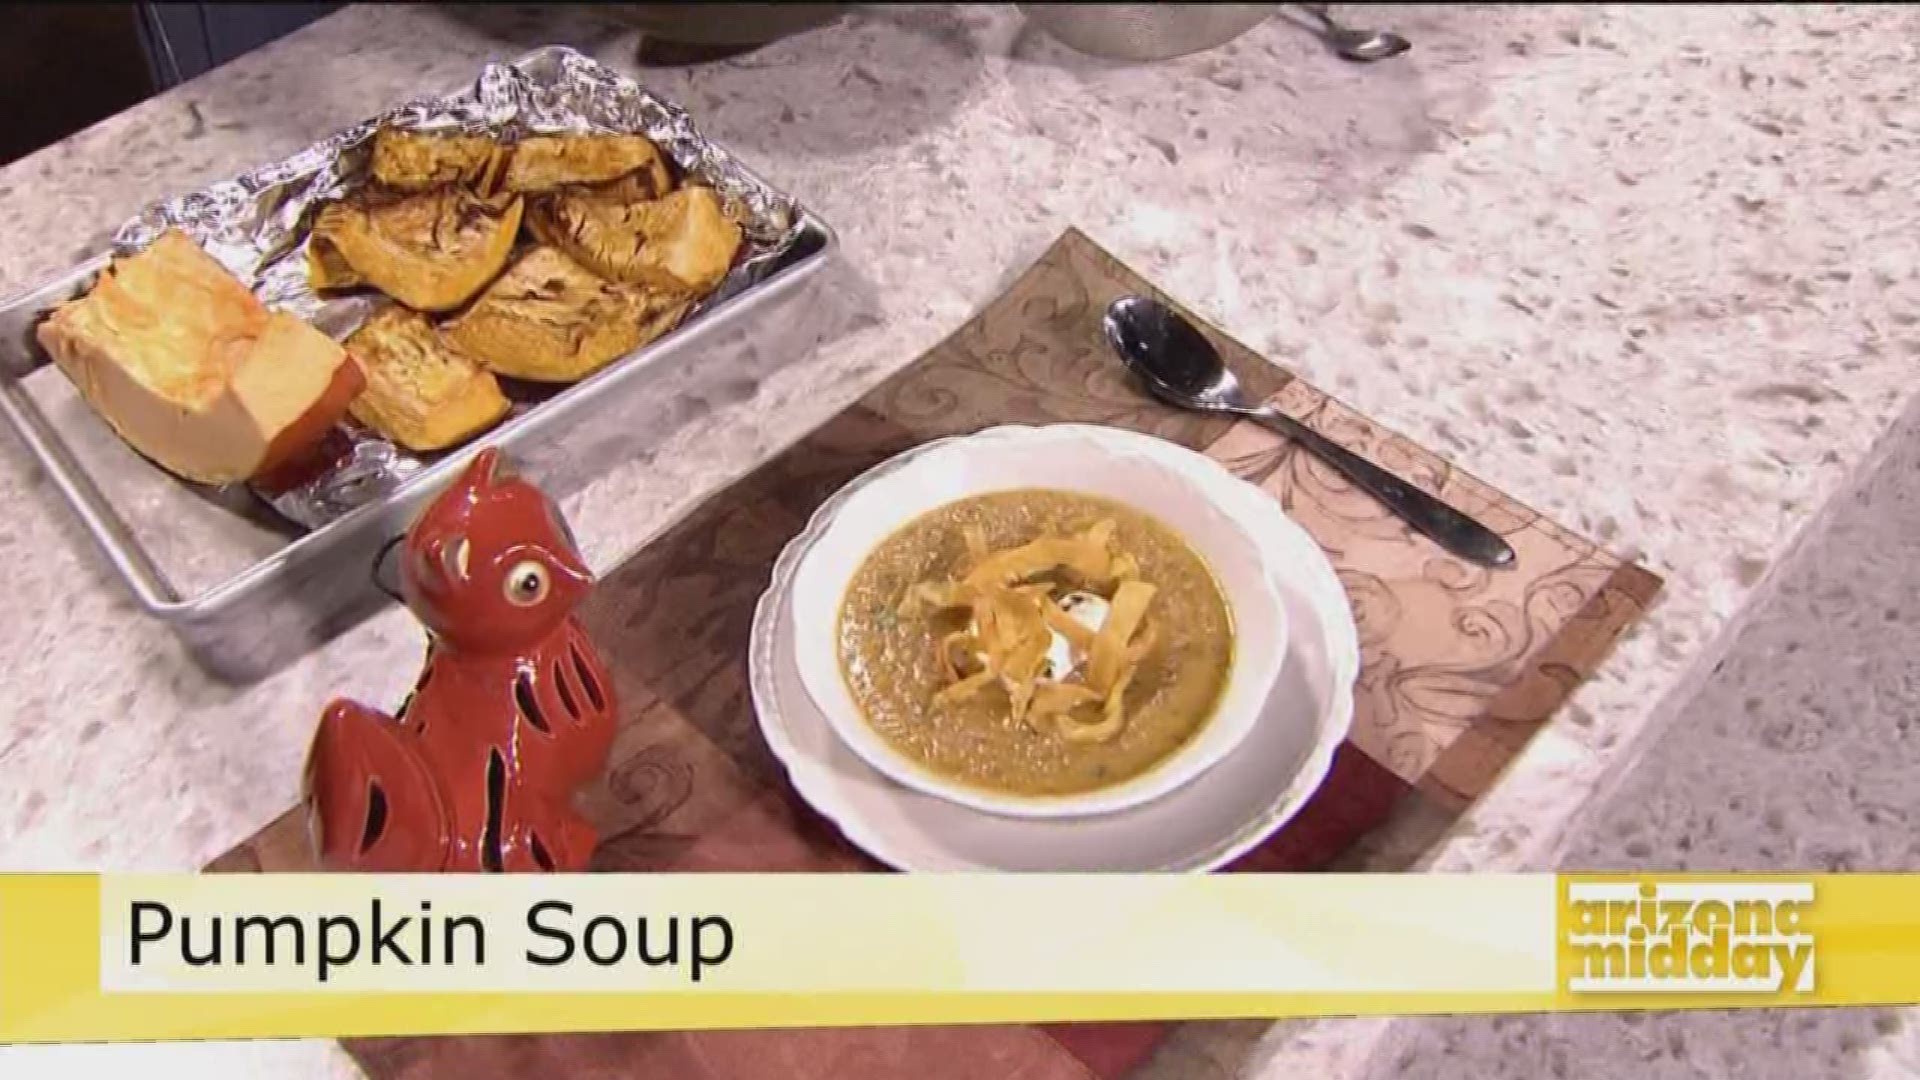 Jan shows us the perfect pumpkin soup recipe to keep you warm during the holidays.